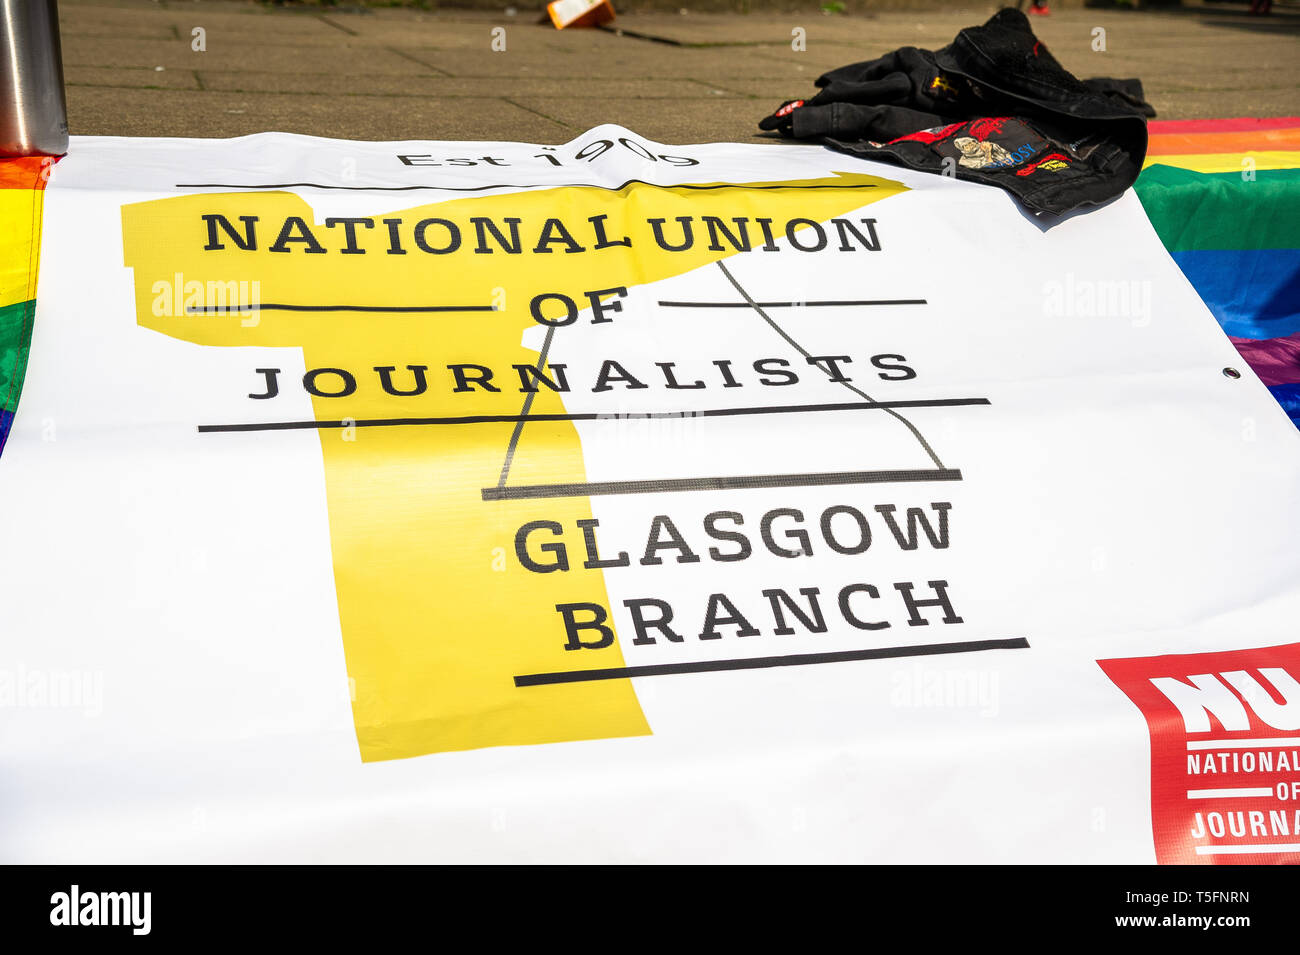 The flag that was used by the NUJ seen laying on the ground during the vigil. People turned out to pay their respects to the Belfast born journalist Lyra McKee, 29, who was shot dead by members of the New IRA whilst while covering riots that were happening in Derry, also known as Londonderry. The NUJ Glasgow branch held a vigil for those wishing to pay their respects for the slain journalist. Stock Photo